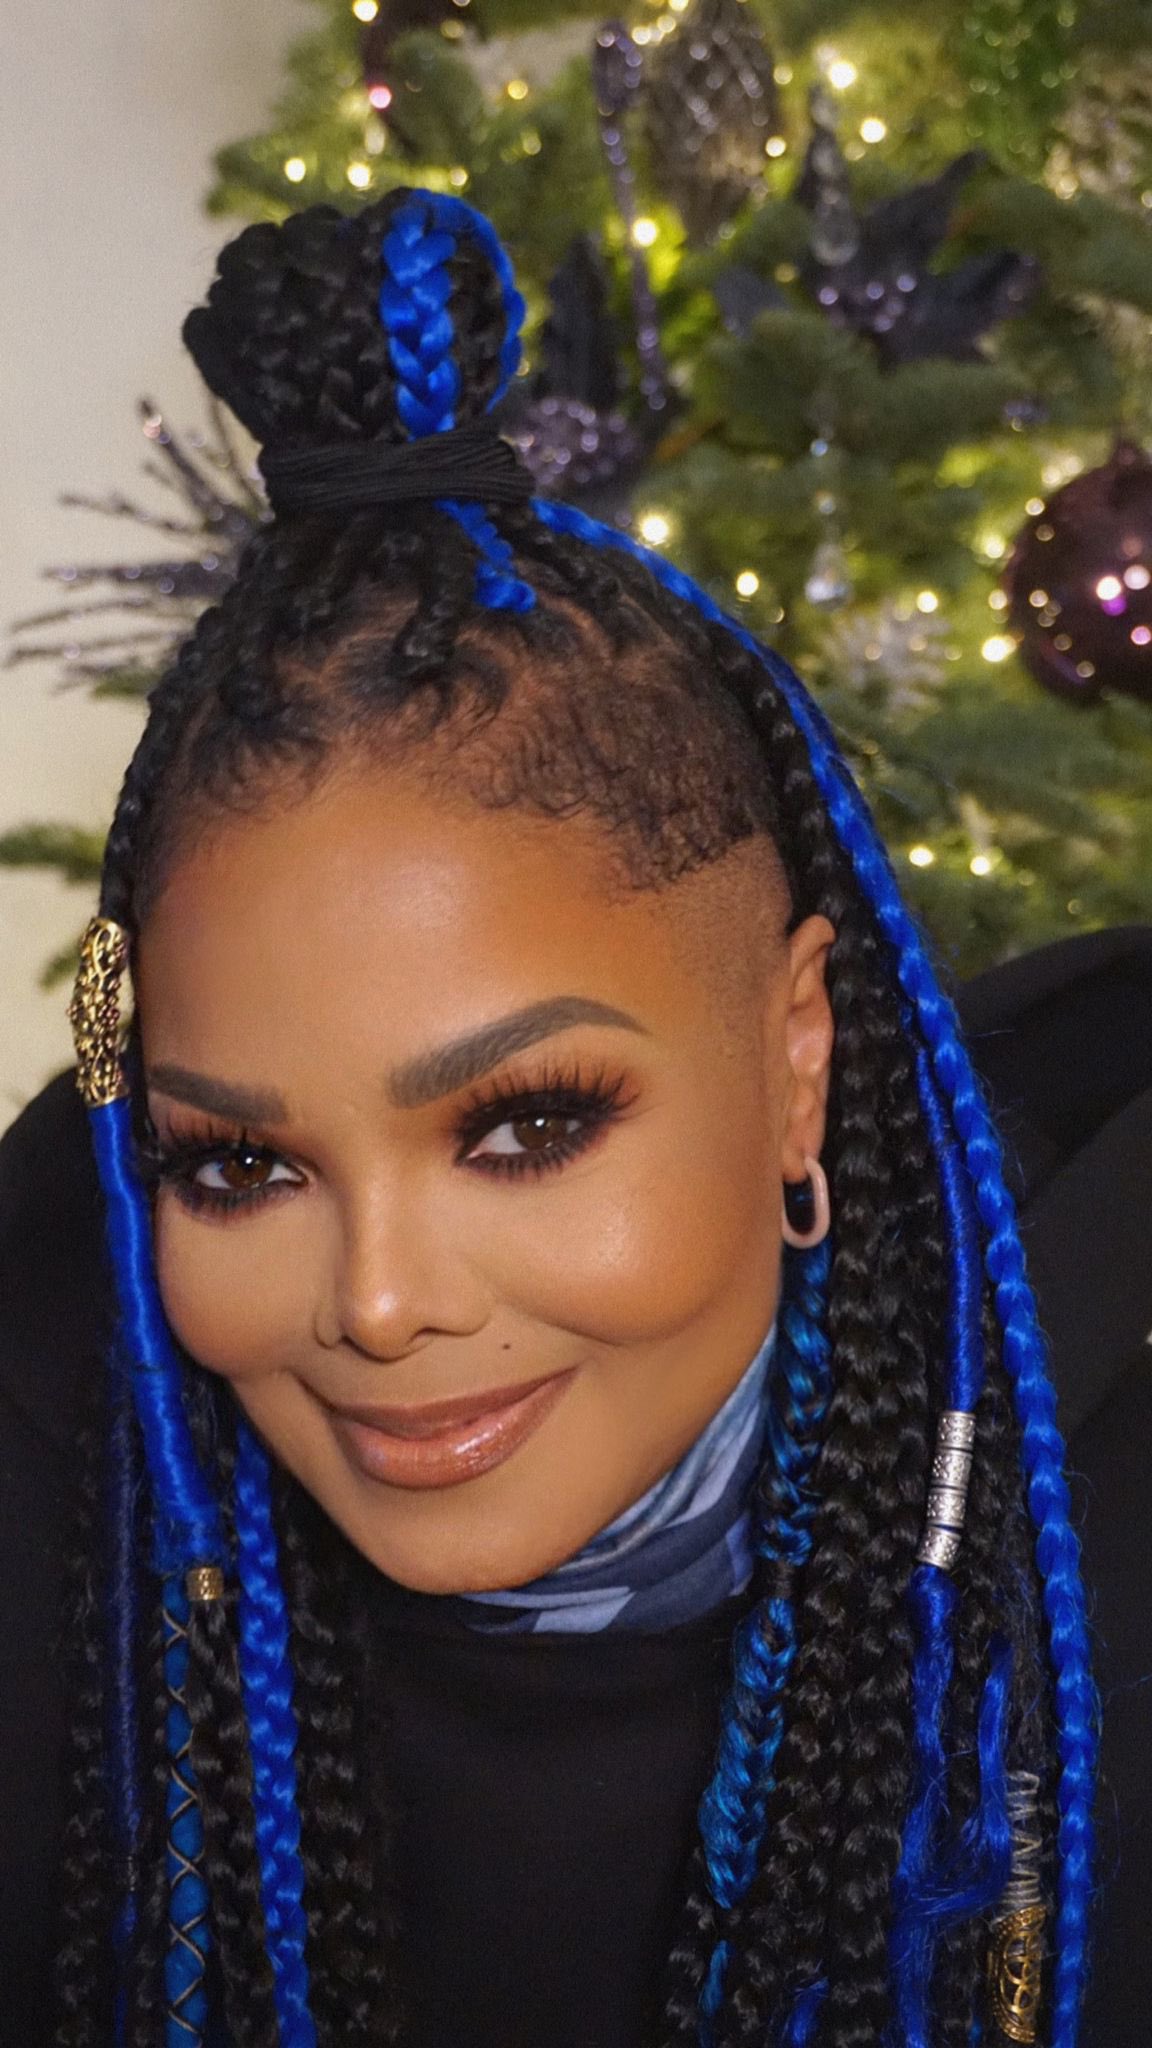 Janet Jackson Debuts New Look - Blue Box Braids & Shaved Sides